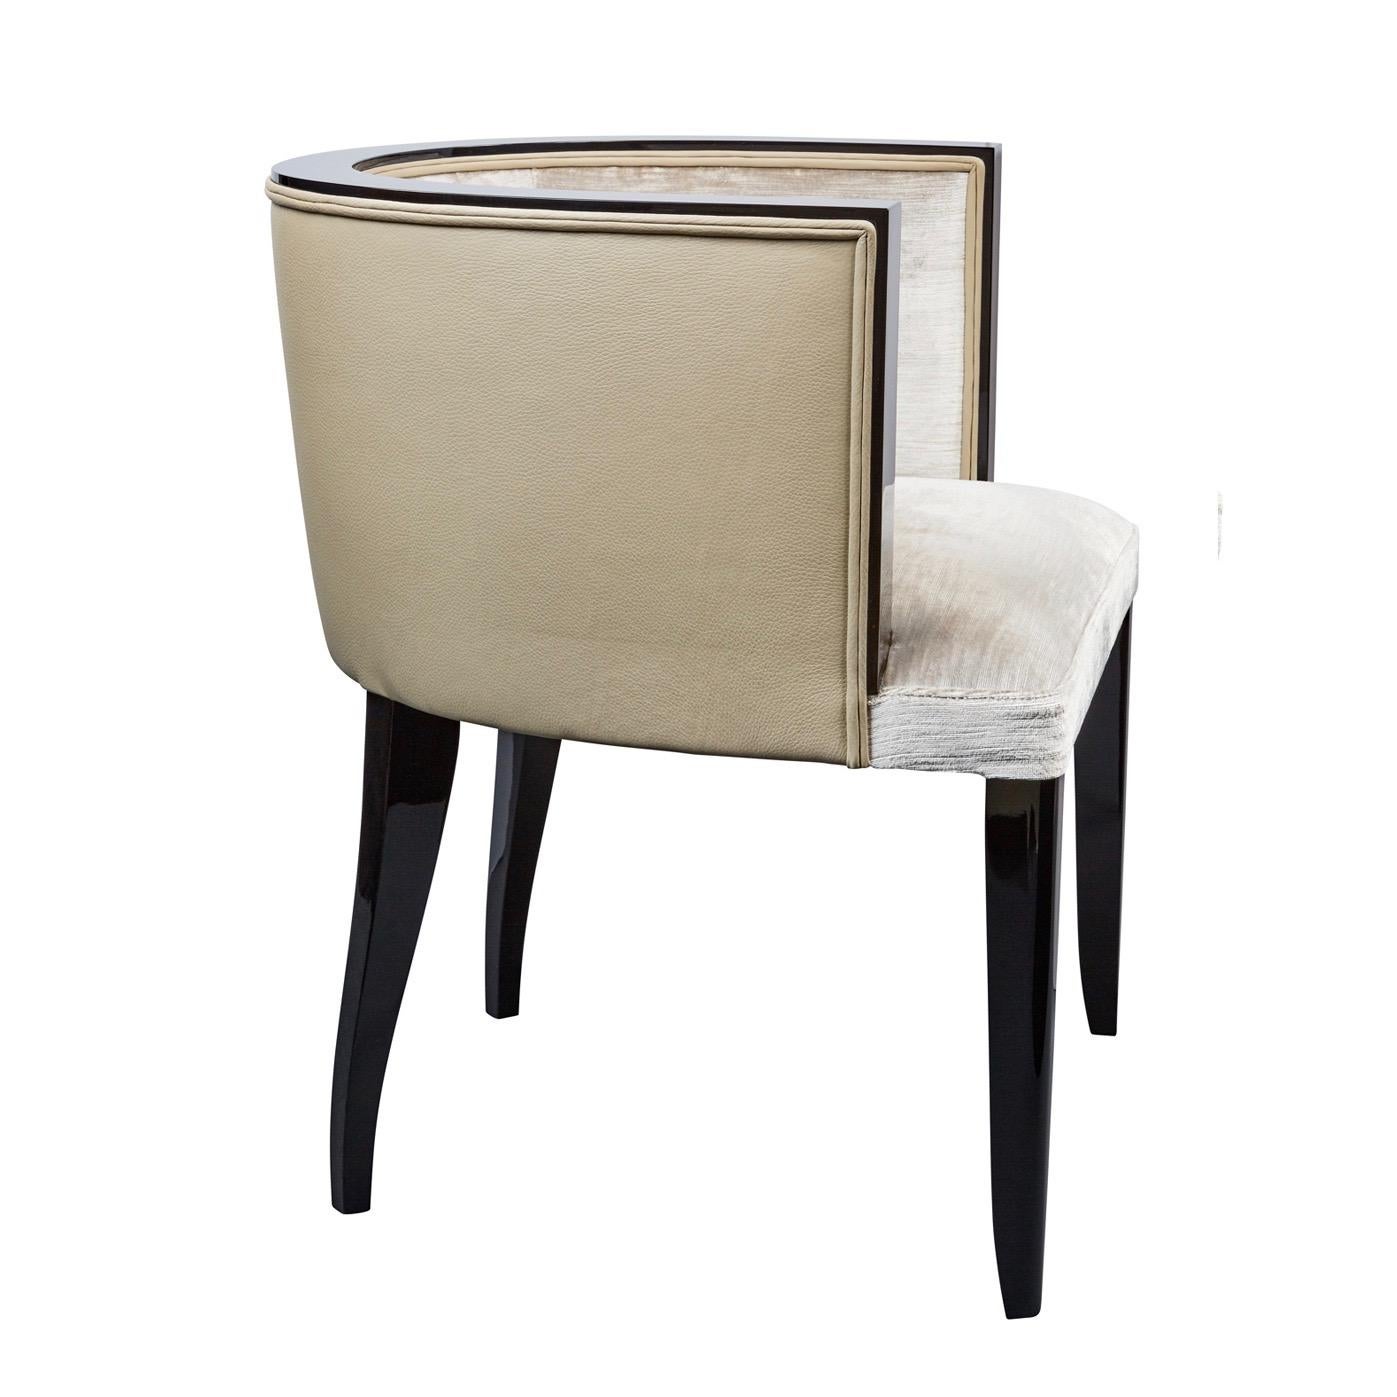 Contemporary Individual Customizable Semicircular Chair with Low Backrest in Art Deco Style For Sale